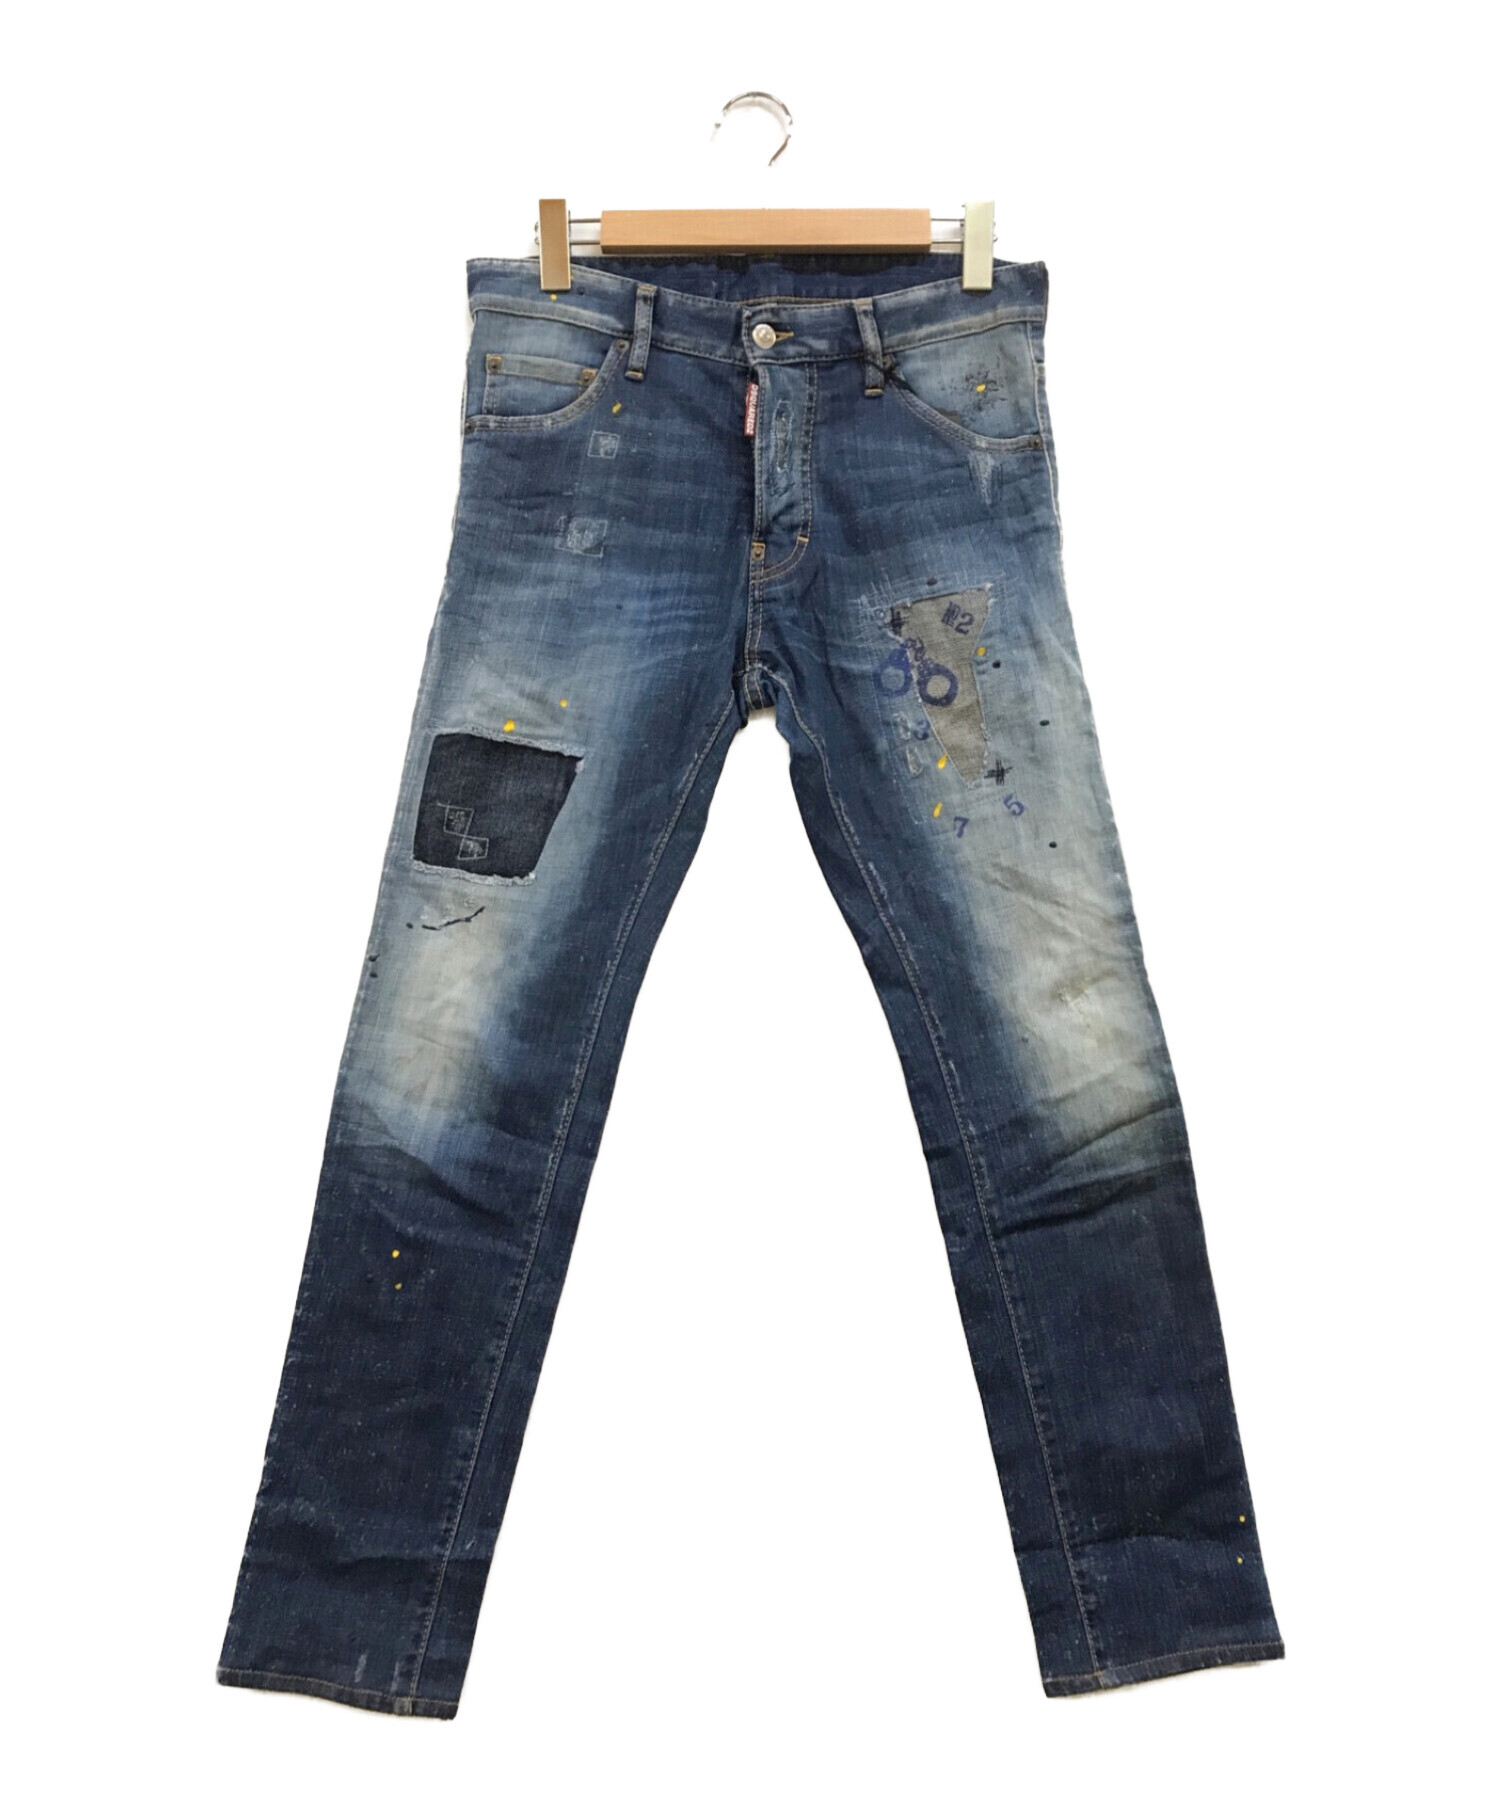 DSQUARED2 cool guy jean size46 - デニム/ジーンズ